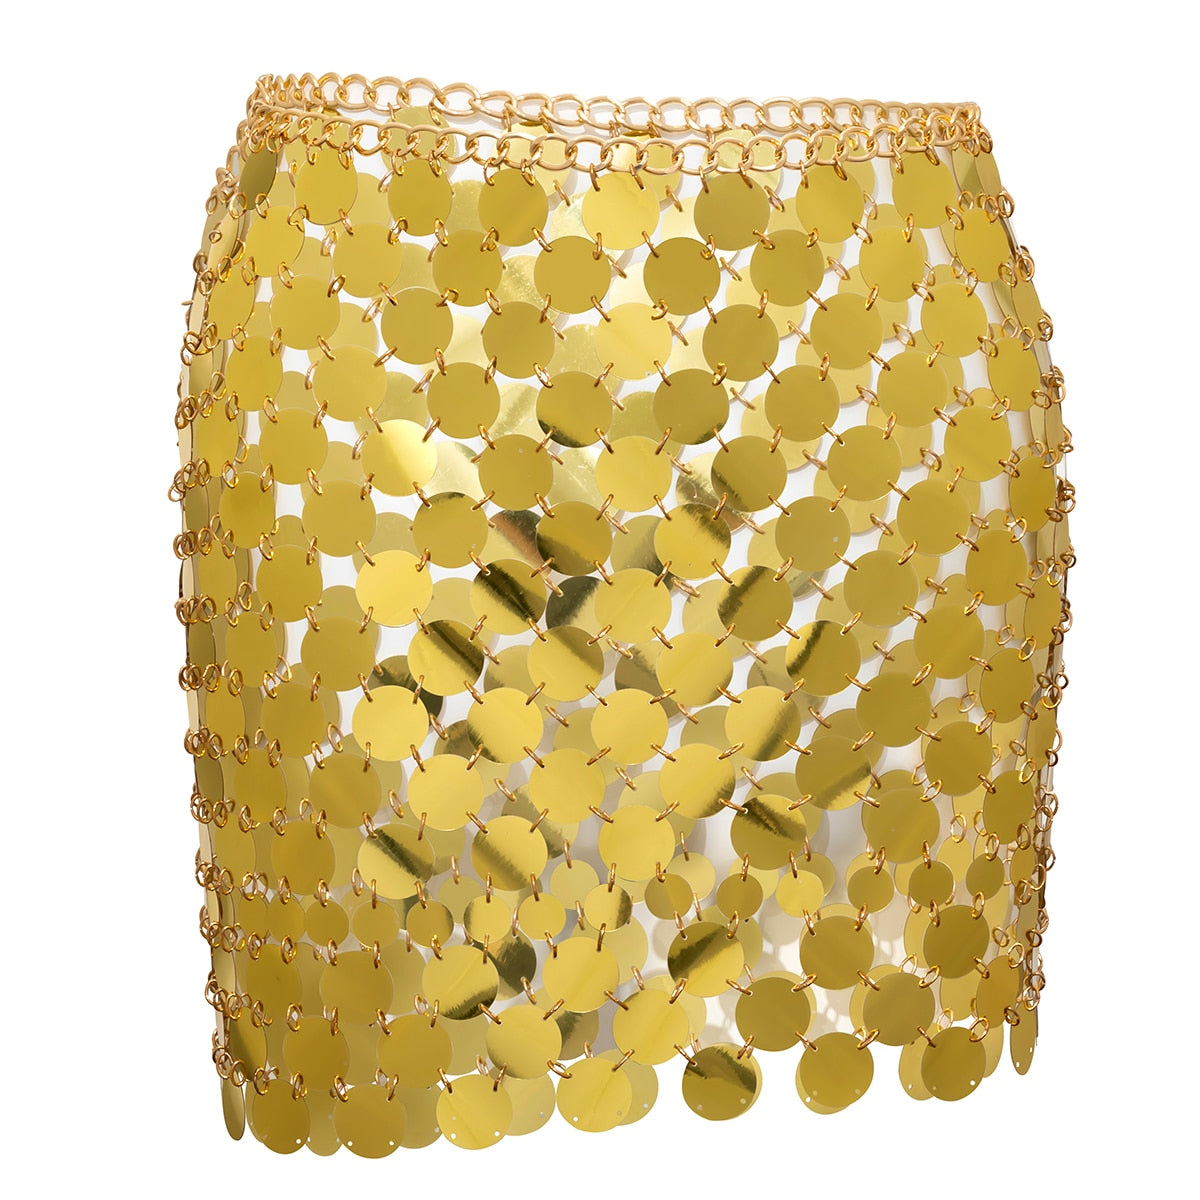 Pierre- the 60s Space Age Mod Style Acrylic Chain Link Mini Skirt 10 Colors